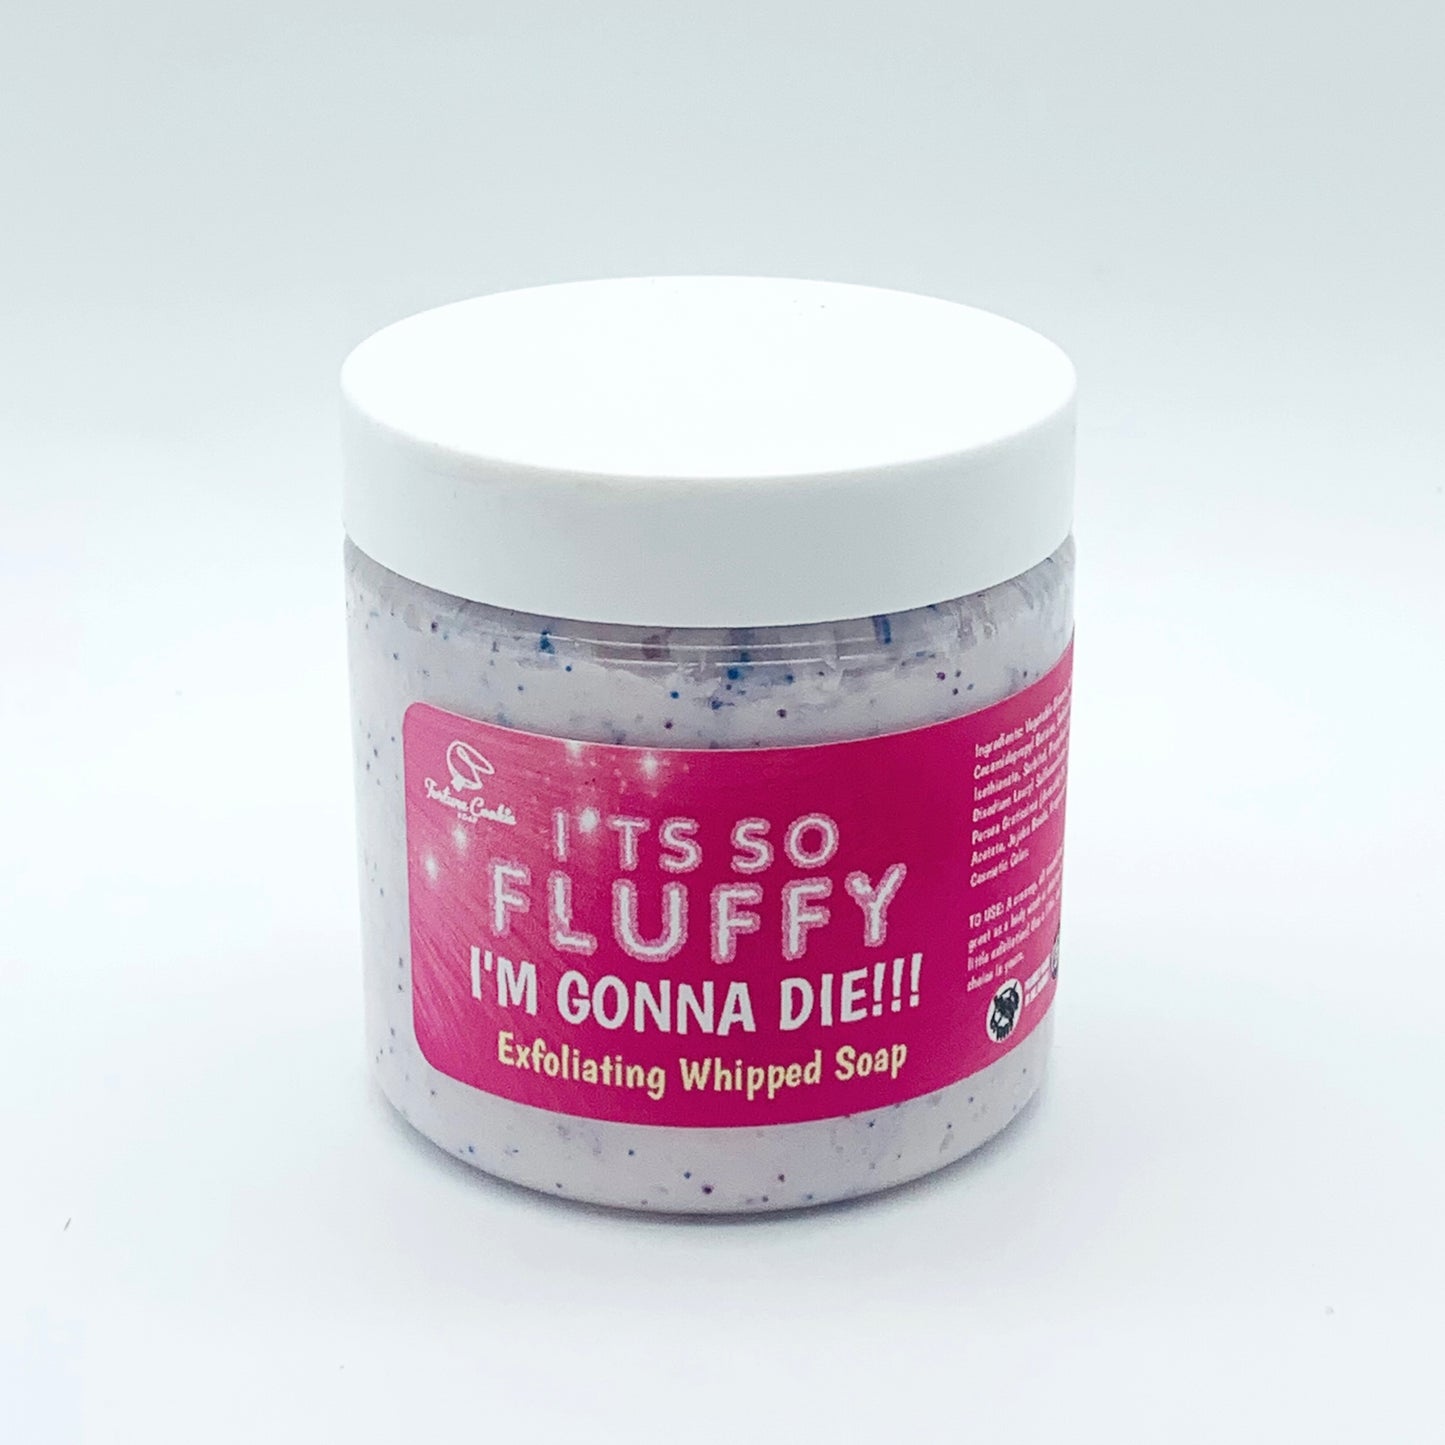 IT'S SO FLUFFY, I'M GONNA DIE! Exfoliating Whipped Soap